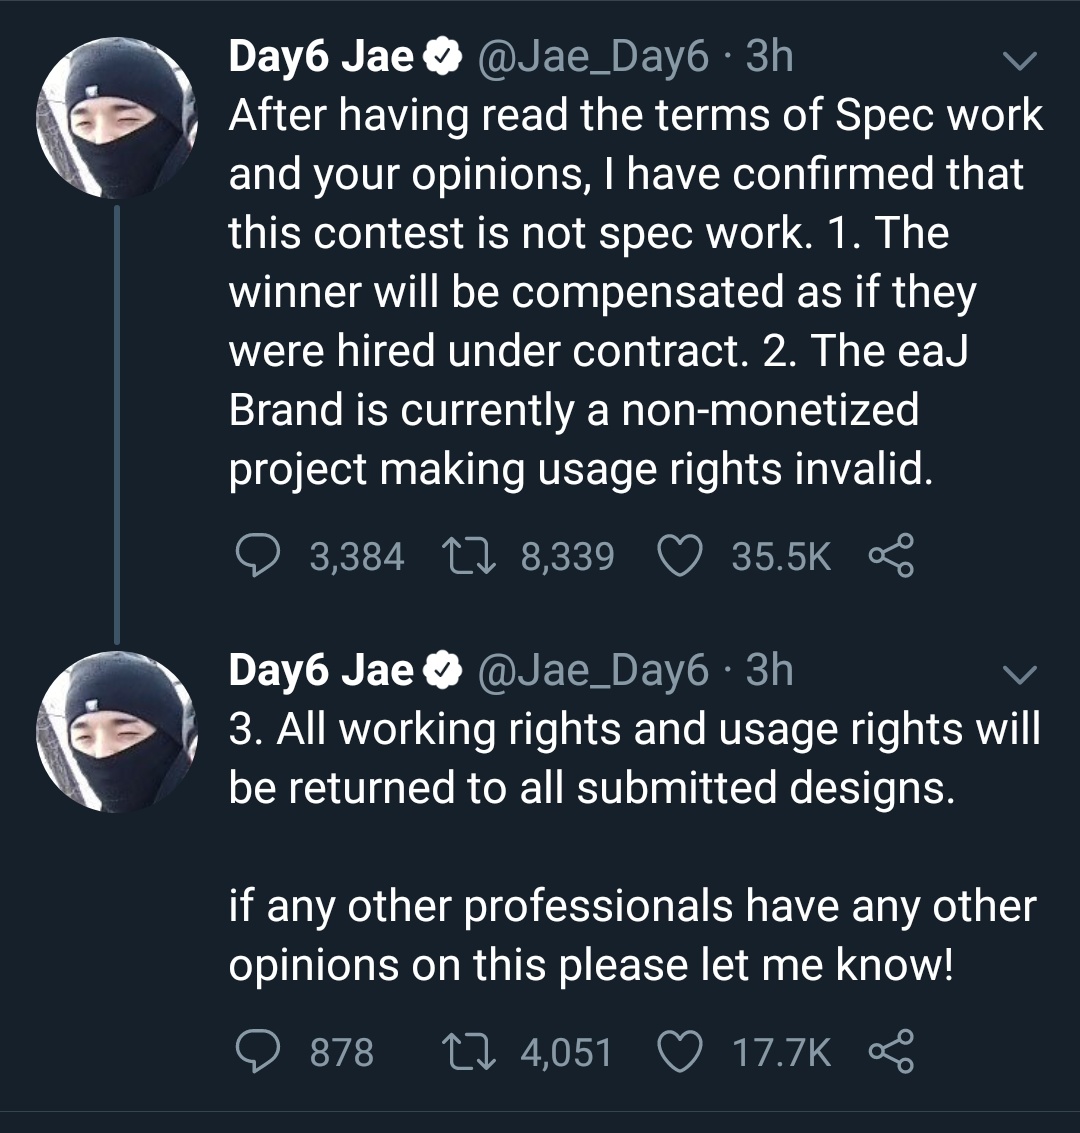 JAE BEING CONSIDERATE AS PER USUAL  he couldve ignored that email but no, he open-mindedly asked for everybody's opinions and took time to read and let himself be educated... he's aware that he's a person that doesn't know everything and is always ready to sit and learn 